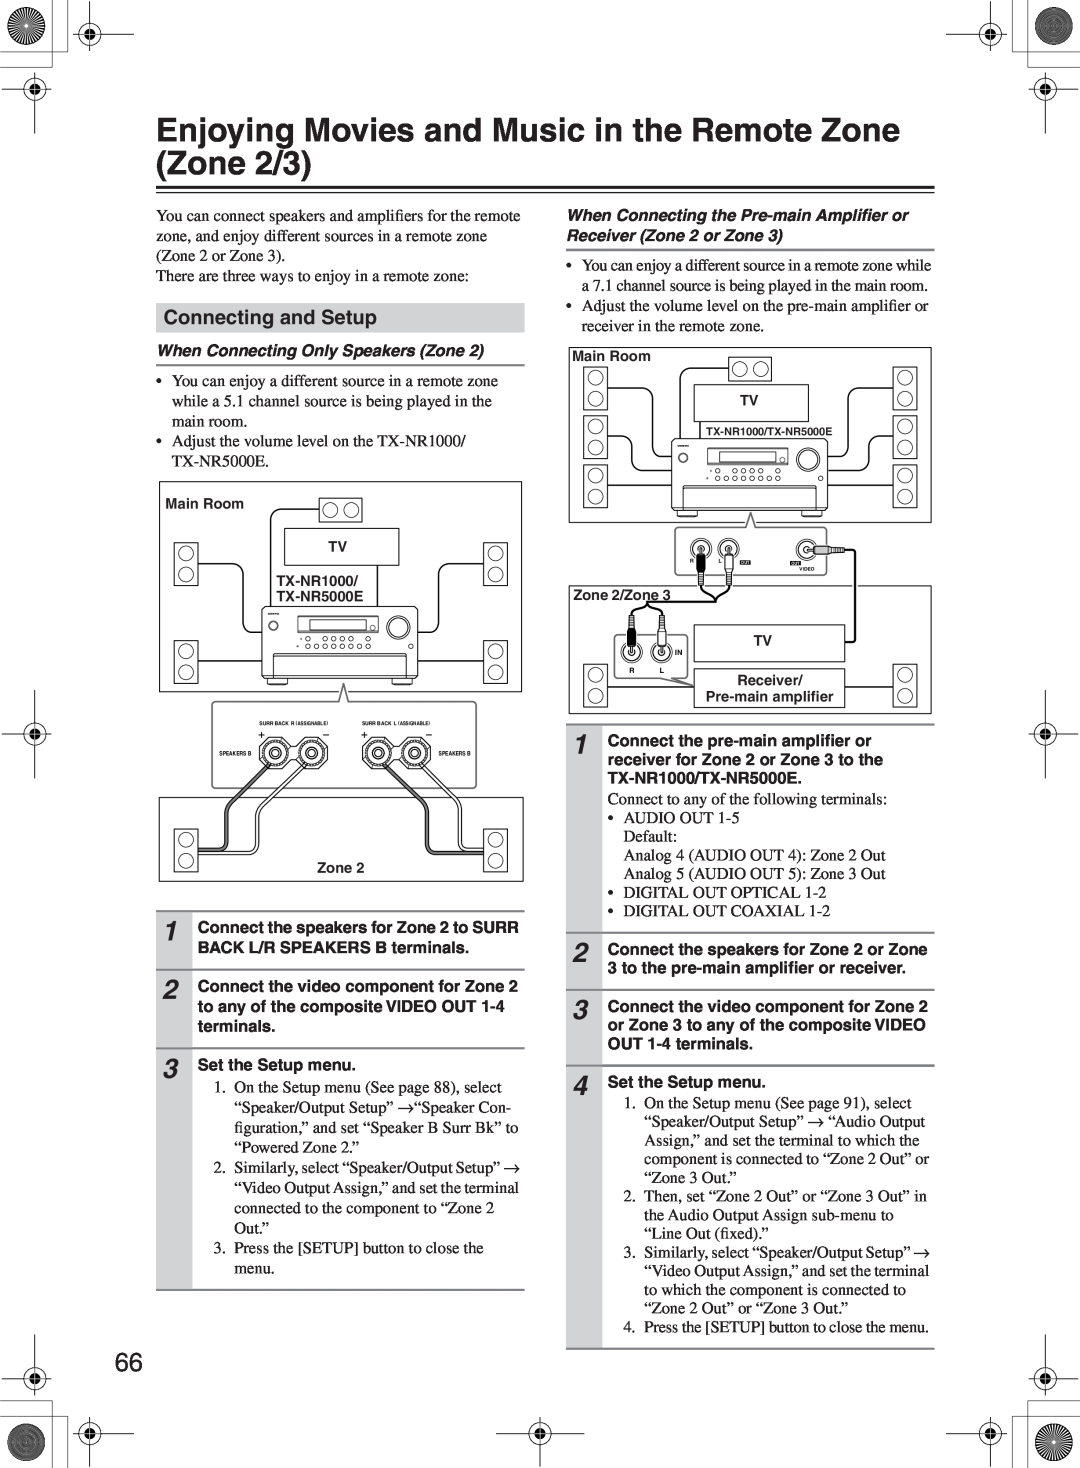 Onkyo TX-NR1000 instruction manual Connecting and Setup, When Connecting Only Speakers Zone 